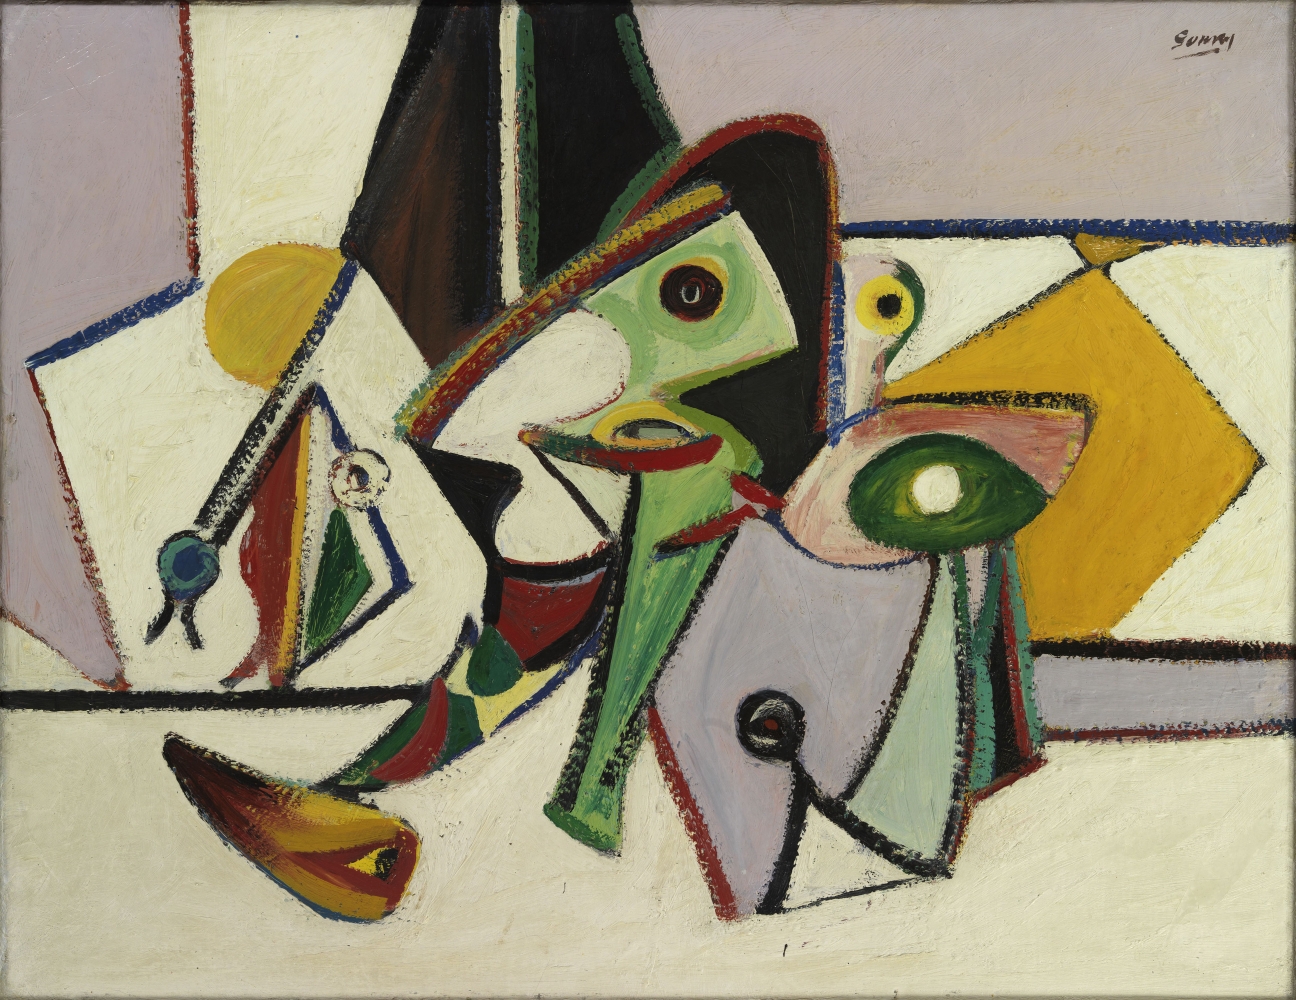 Organization No. 2, 1936&ndash;37, oil on canvas, 28 x 36 in. (71.1 x 91.4 cm). Private collection. [AGCR: P175]